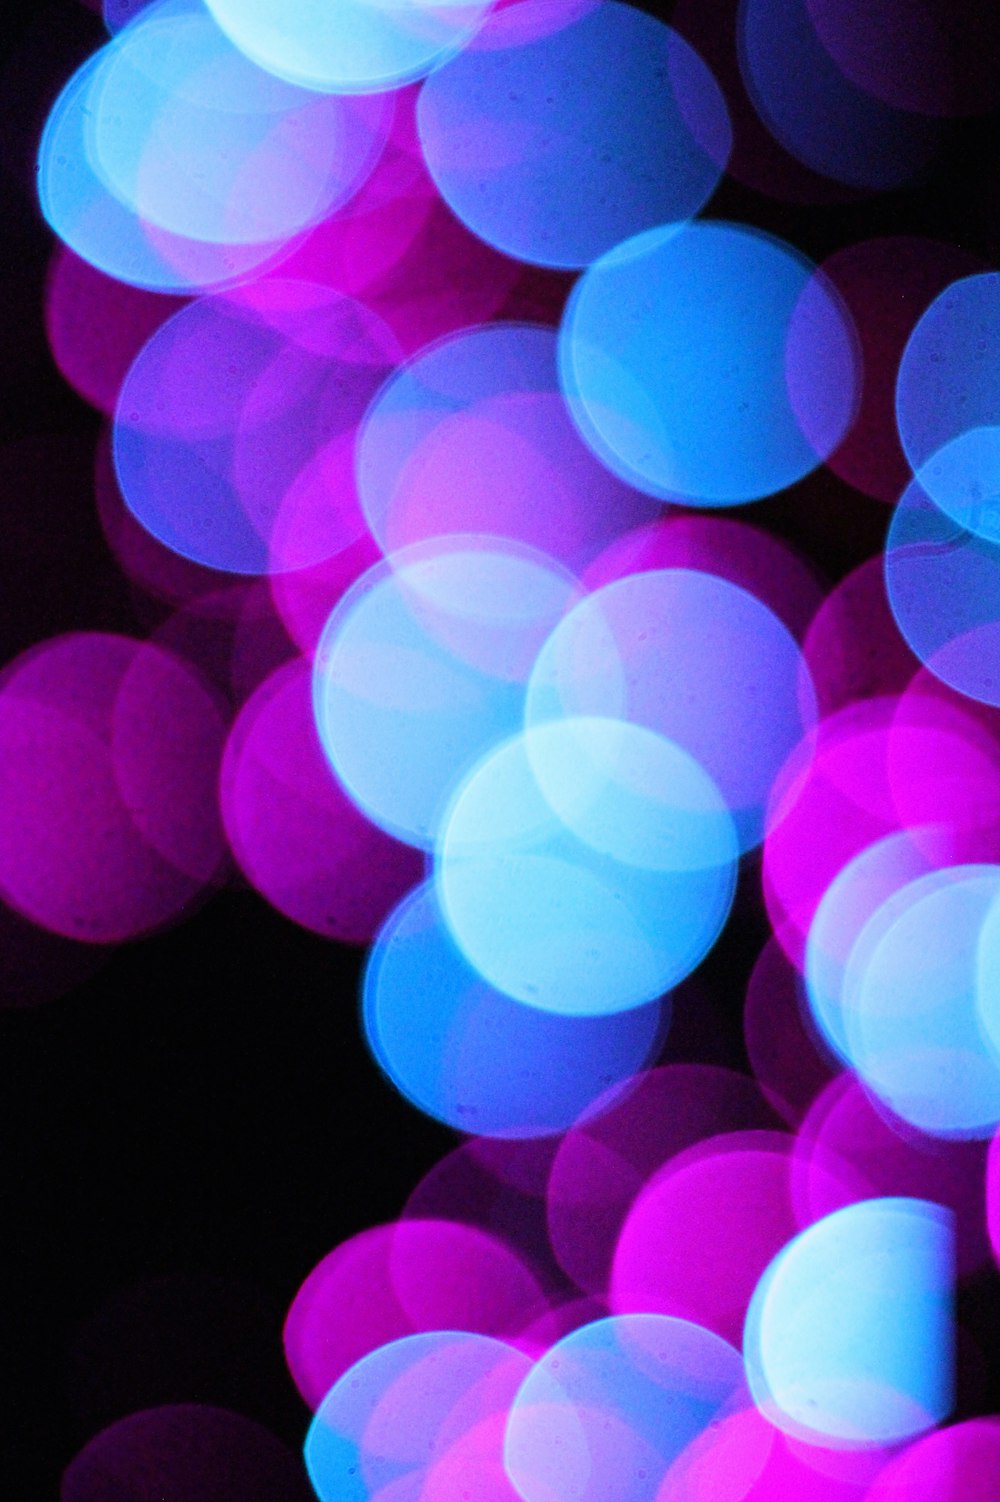 blue and pink bokeh lights